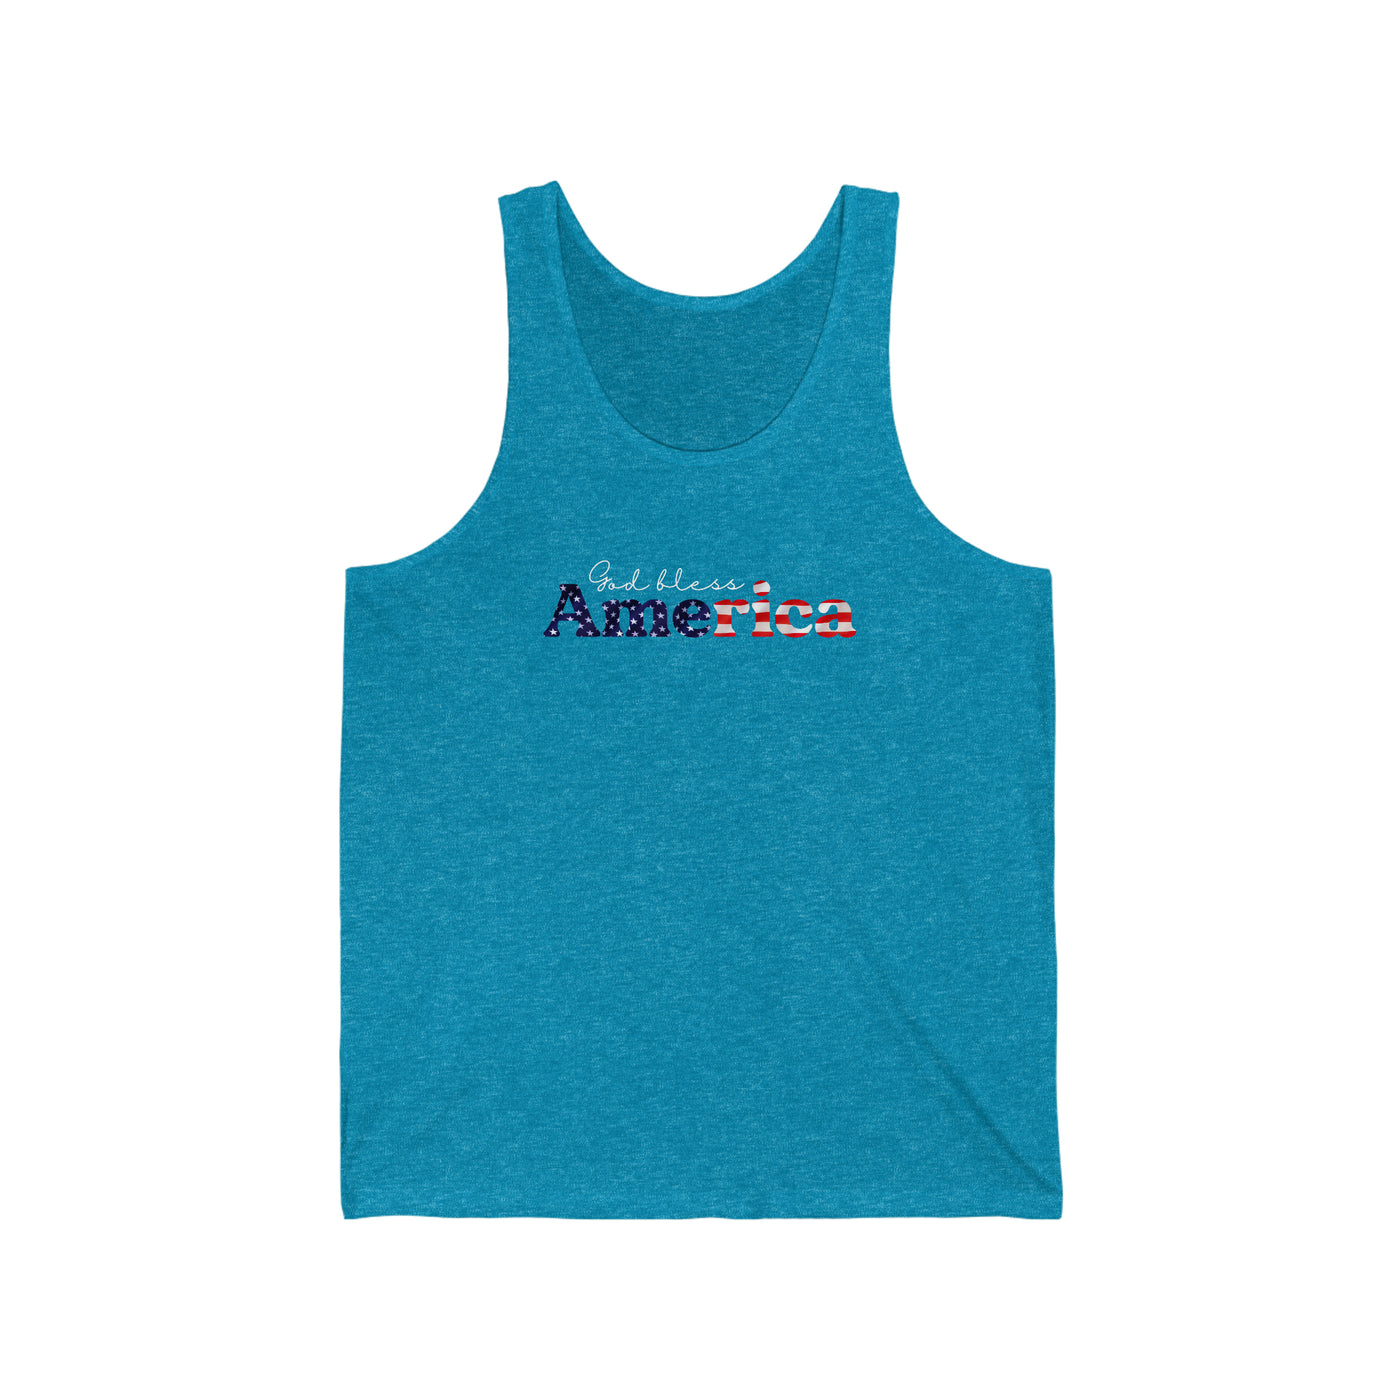 4th of july God Bless America mens Tank Top blue